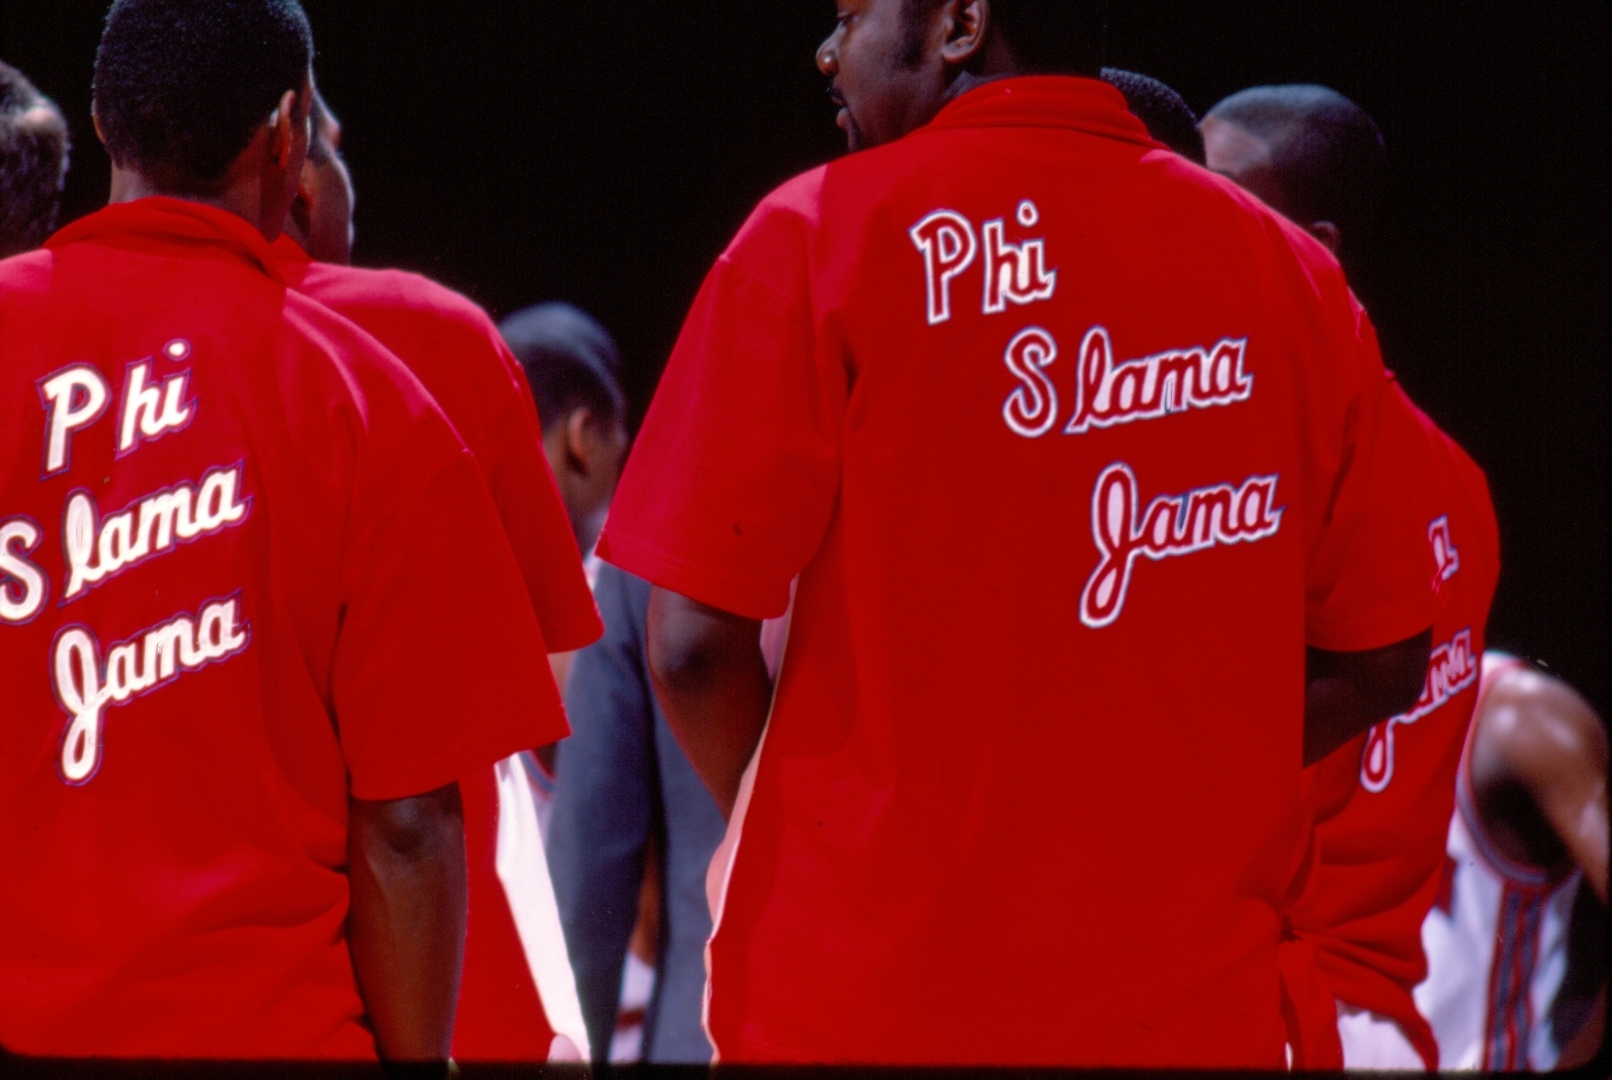 The classic "Phi Slama Jama" warmups during the UH men's basketball golden days of the 1980s. | All photos courtesy of UH Athletics